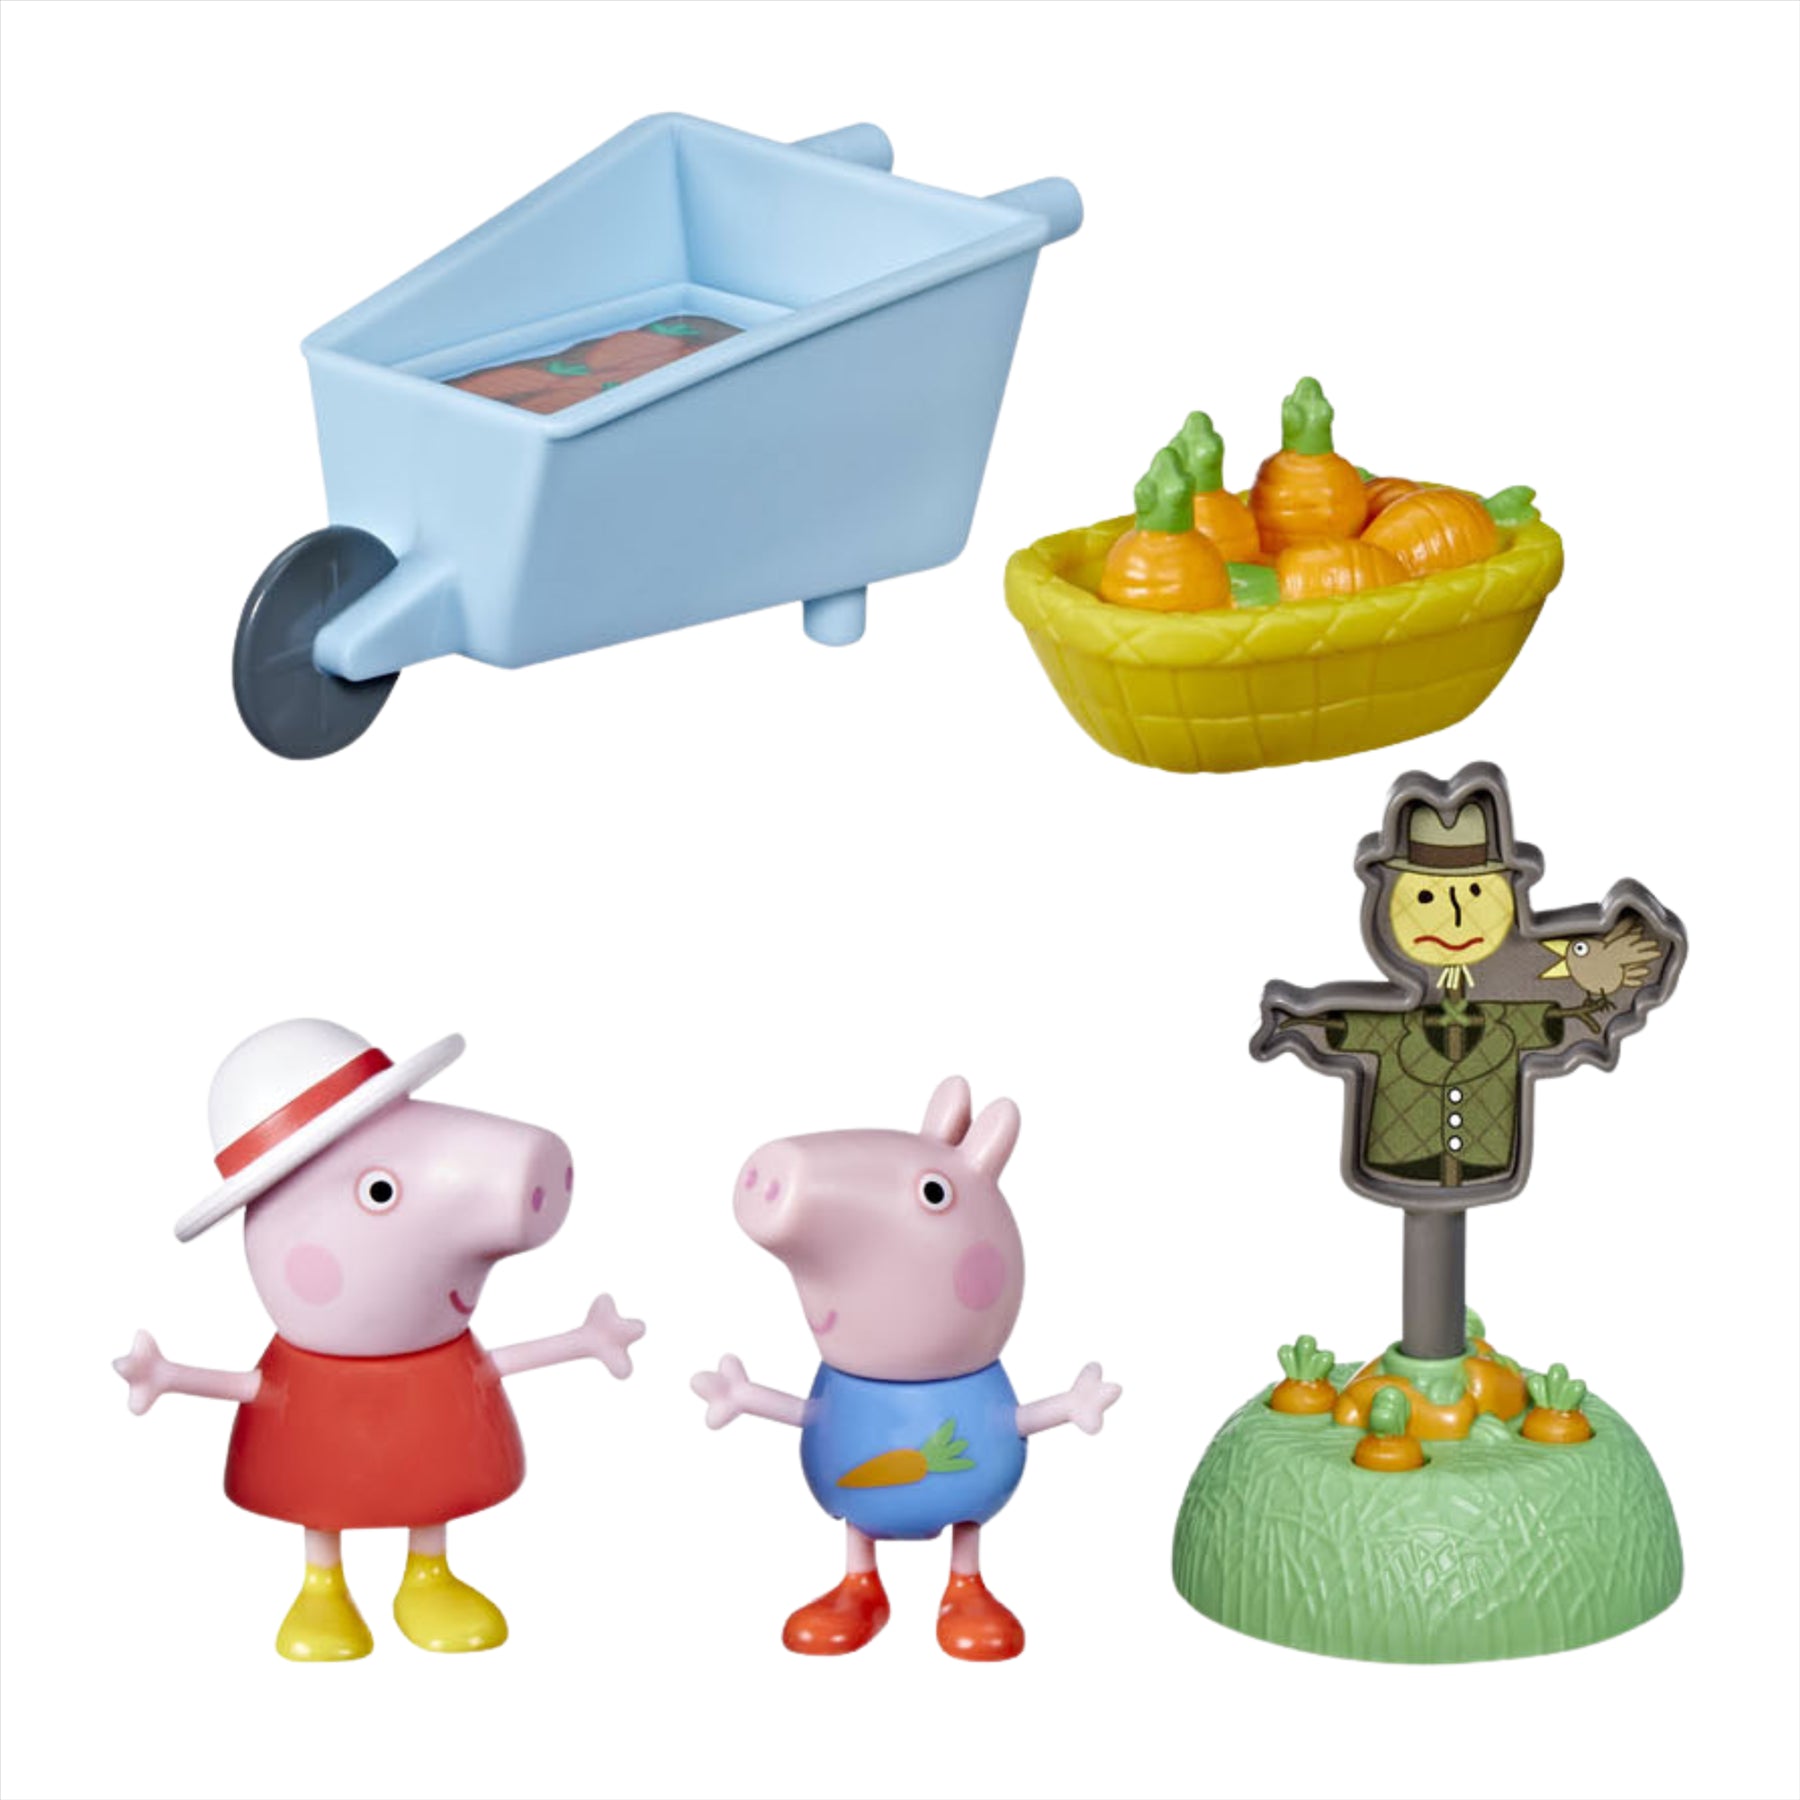 Peppa Pig Peppa's Growing Garden Toy Playset with Figure and Accessories - Toptoys2u